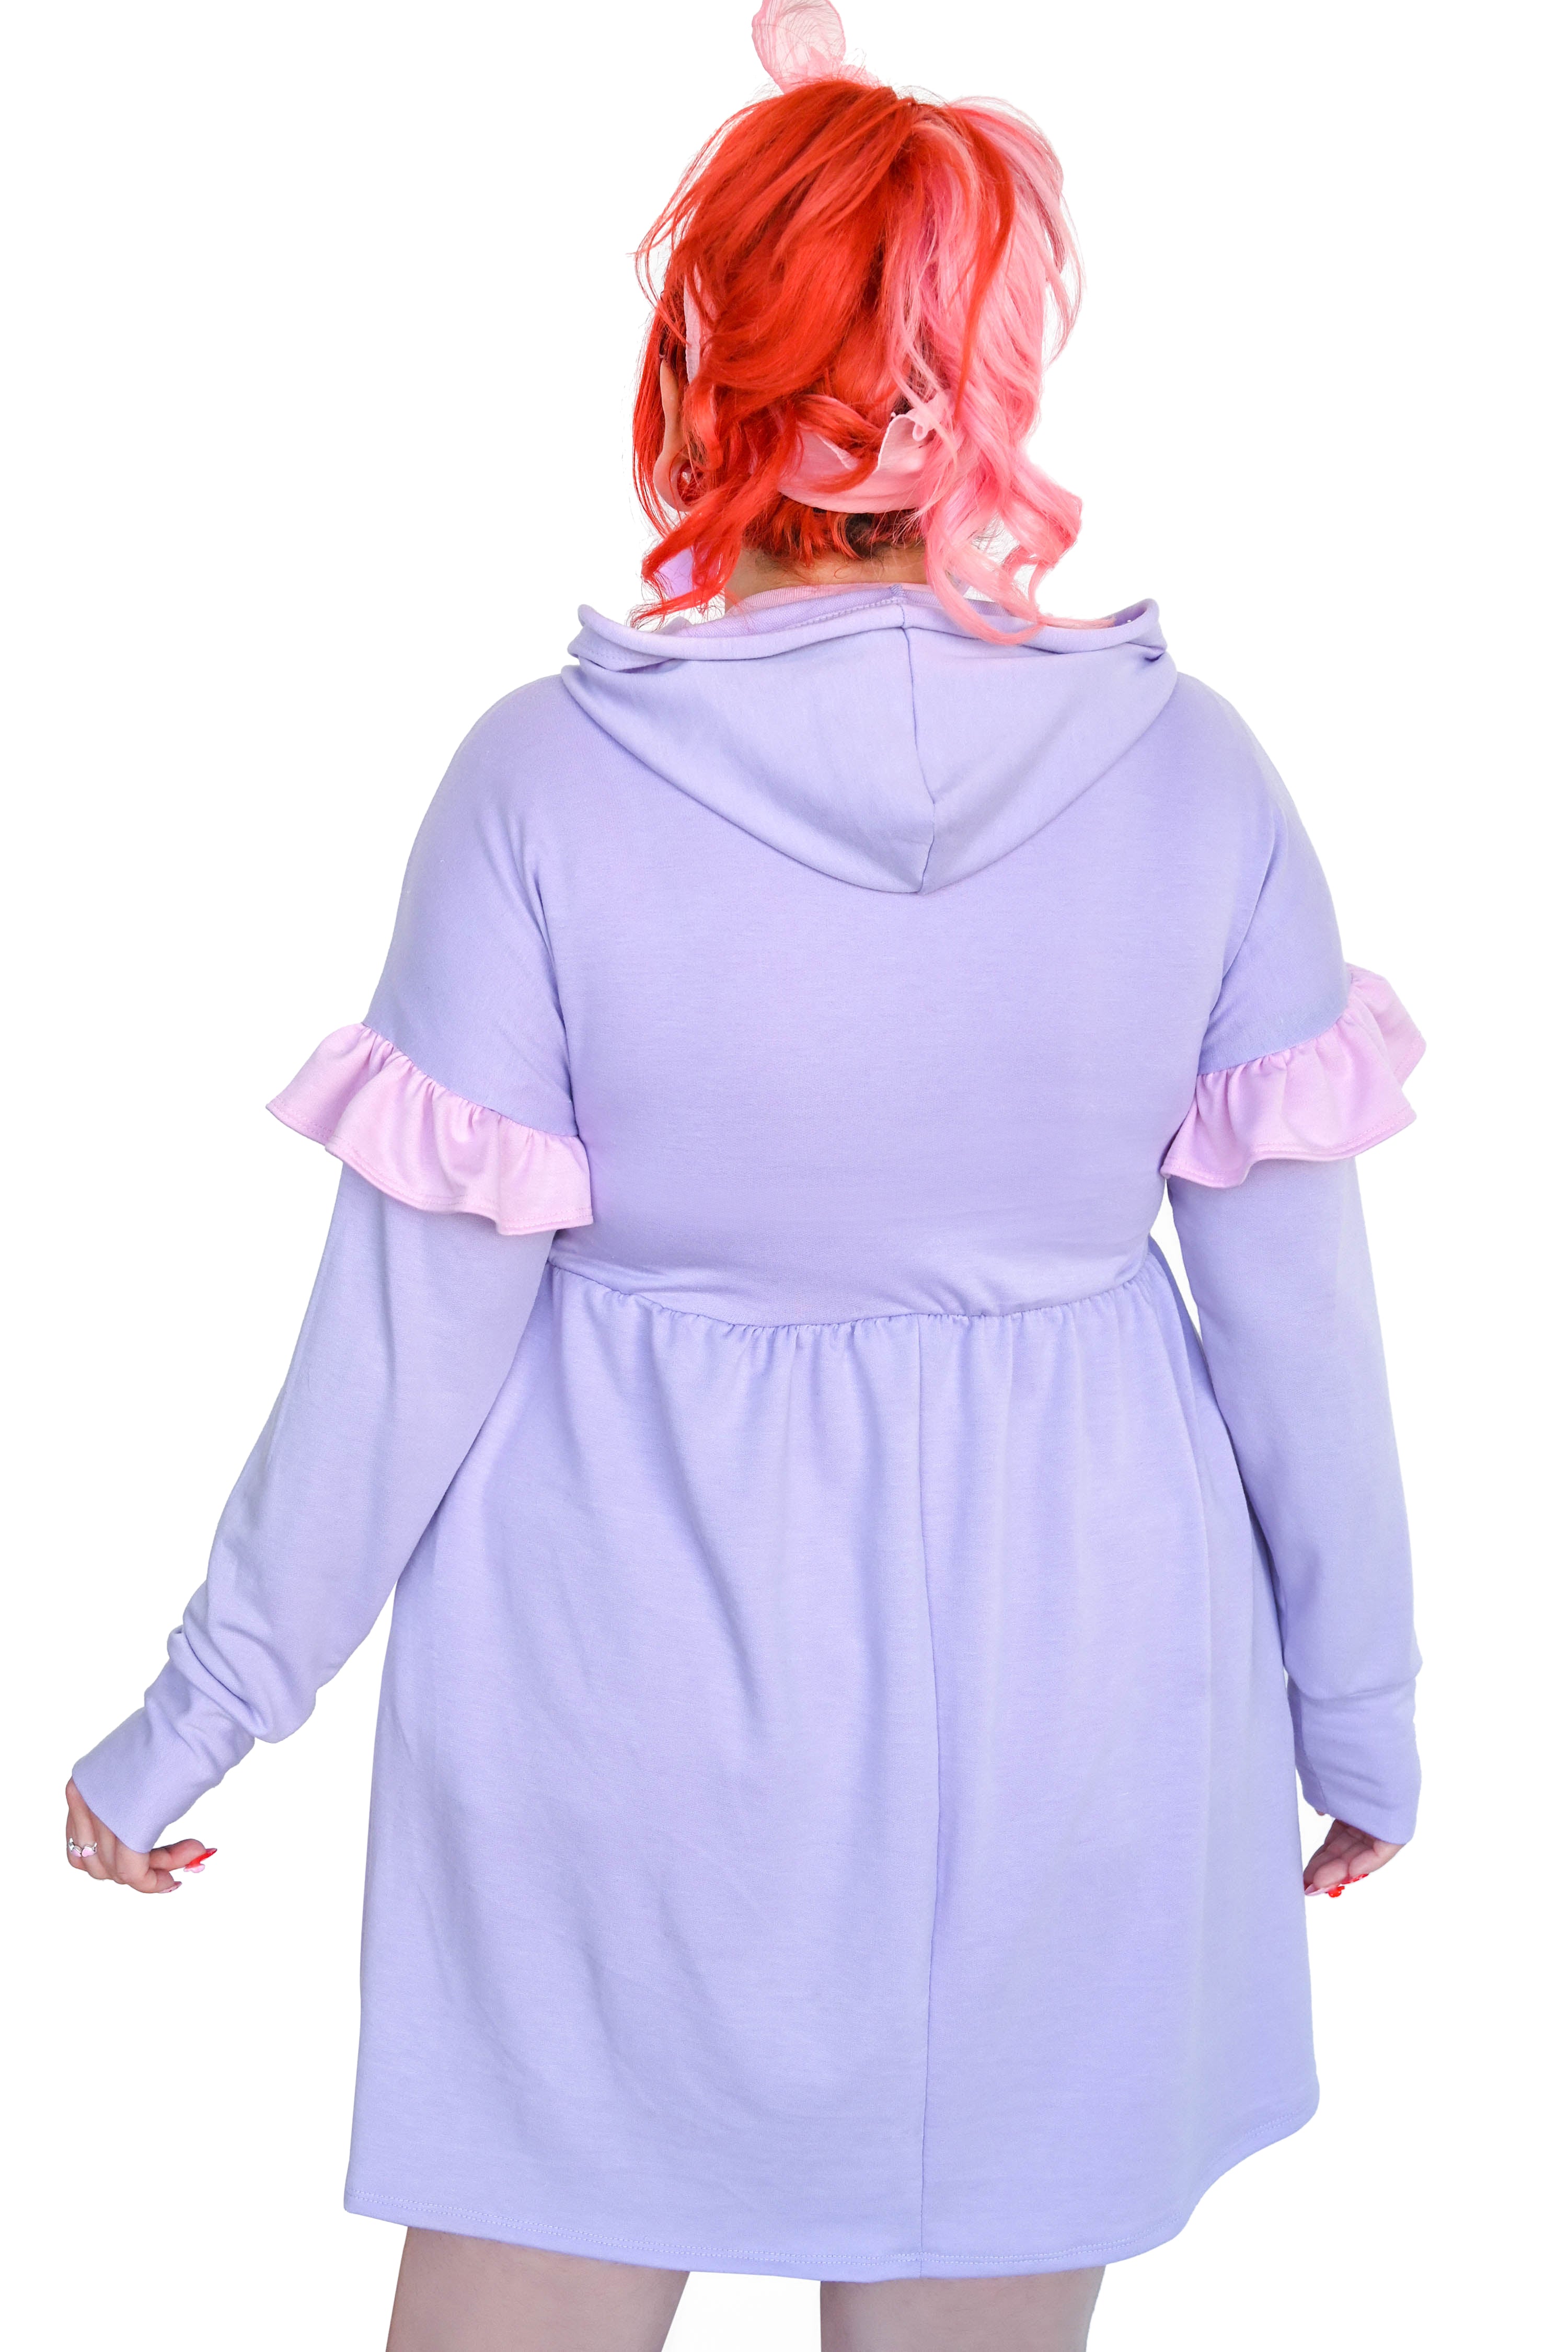 Sweetheart Hoodie Dress with Pockets - LAST ONE!